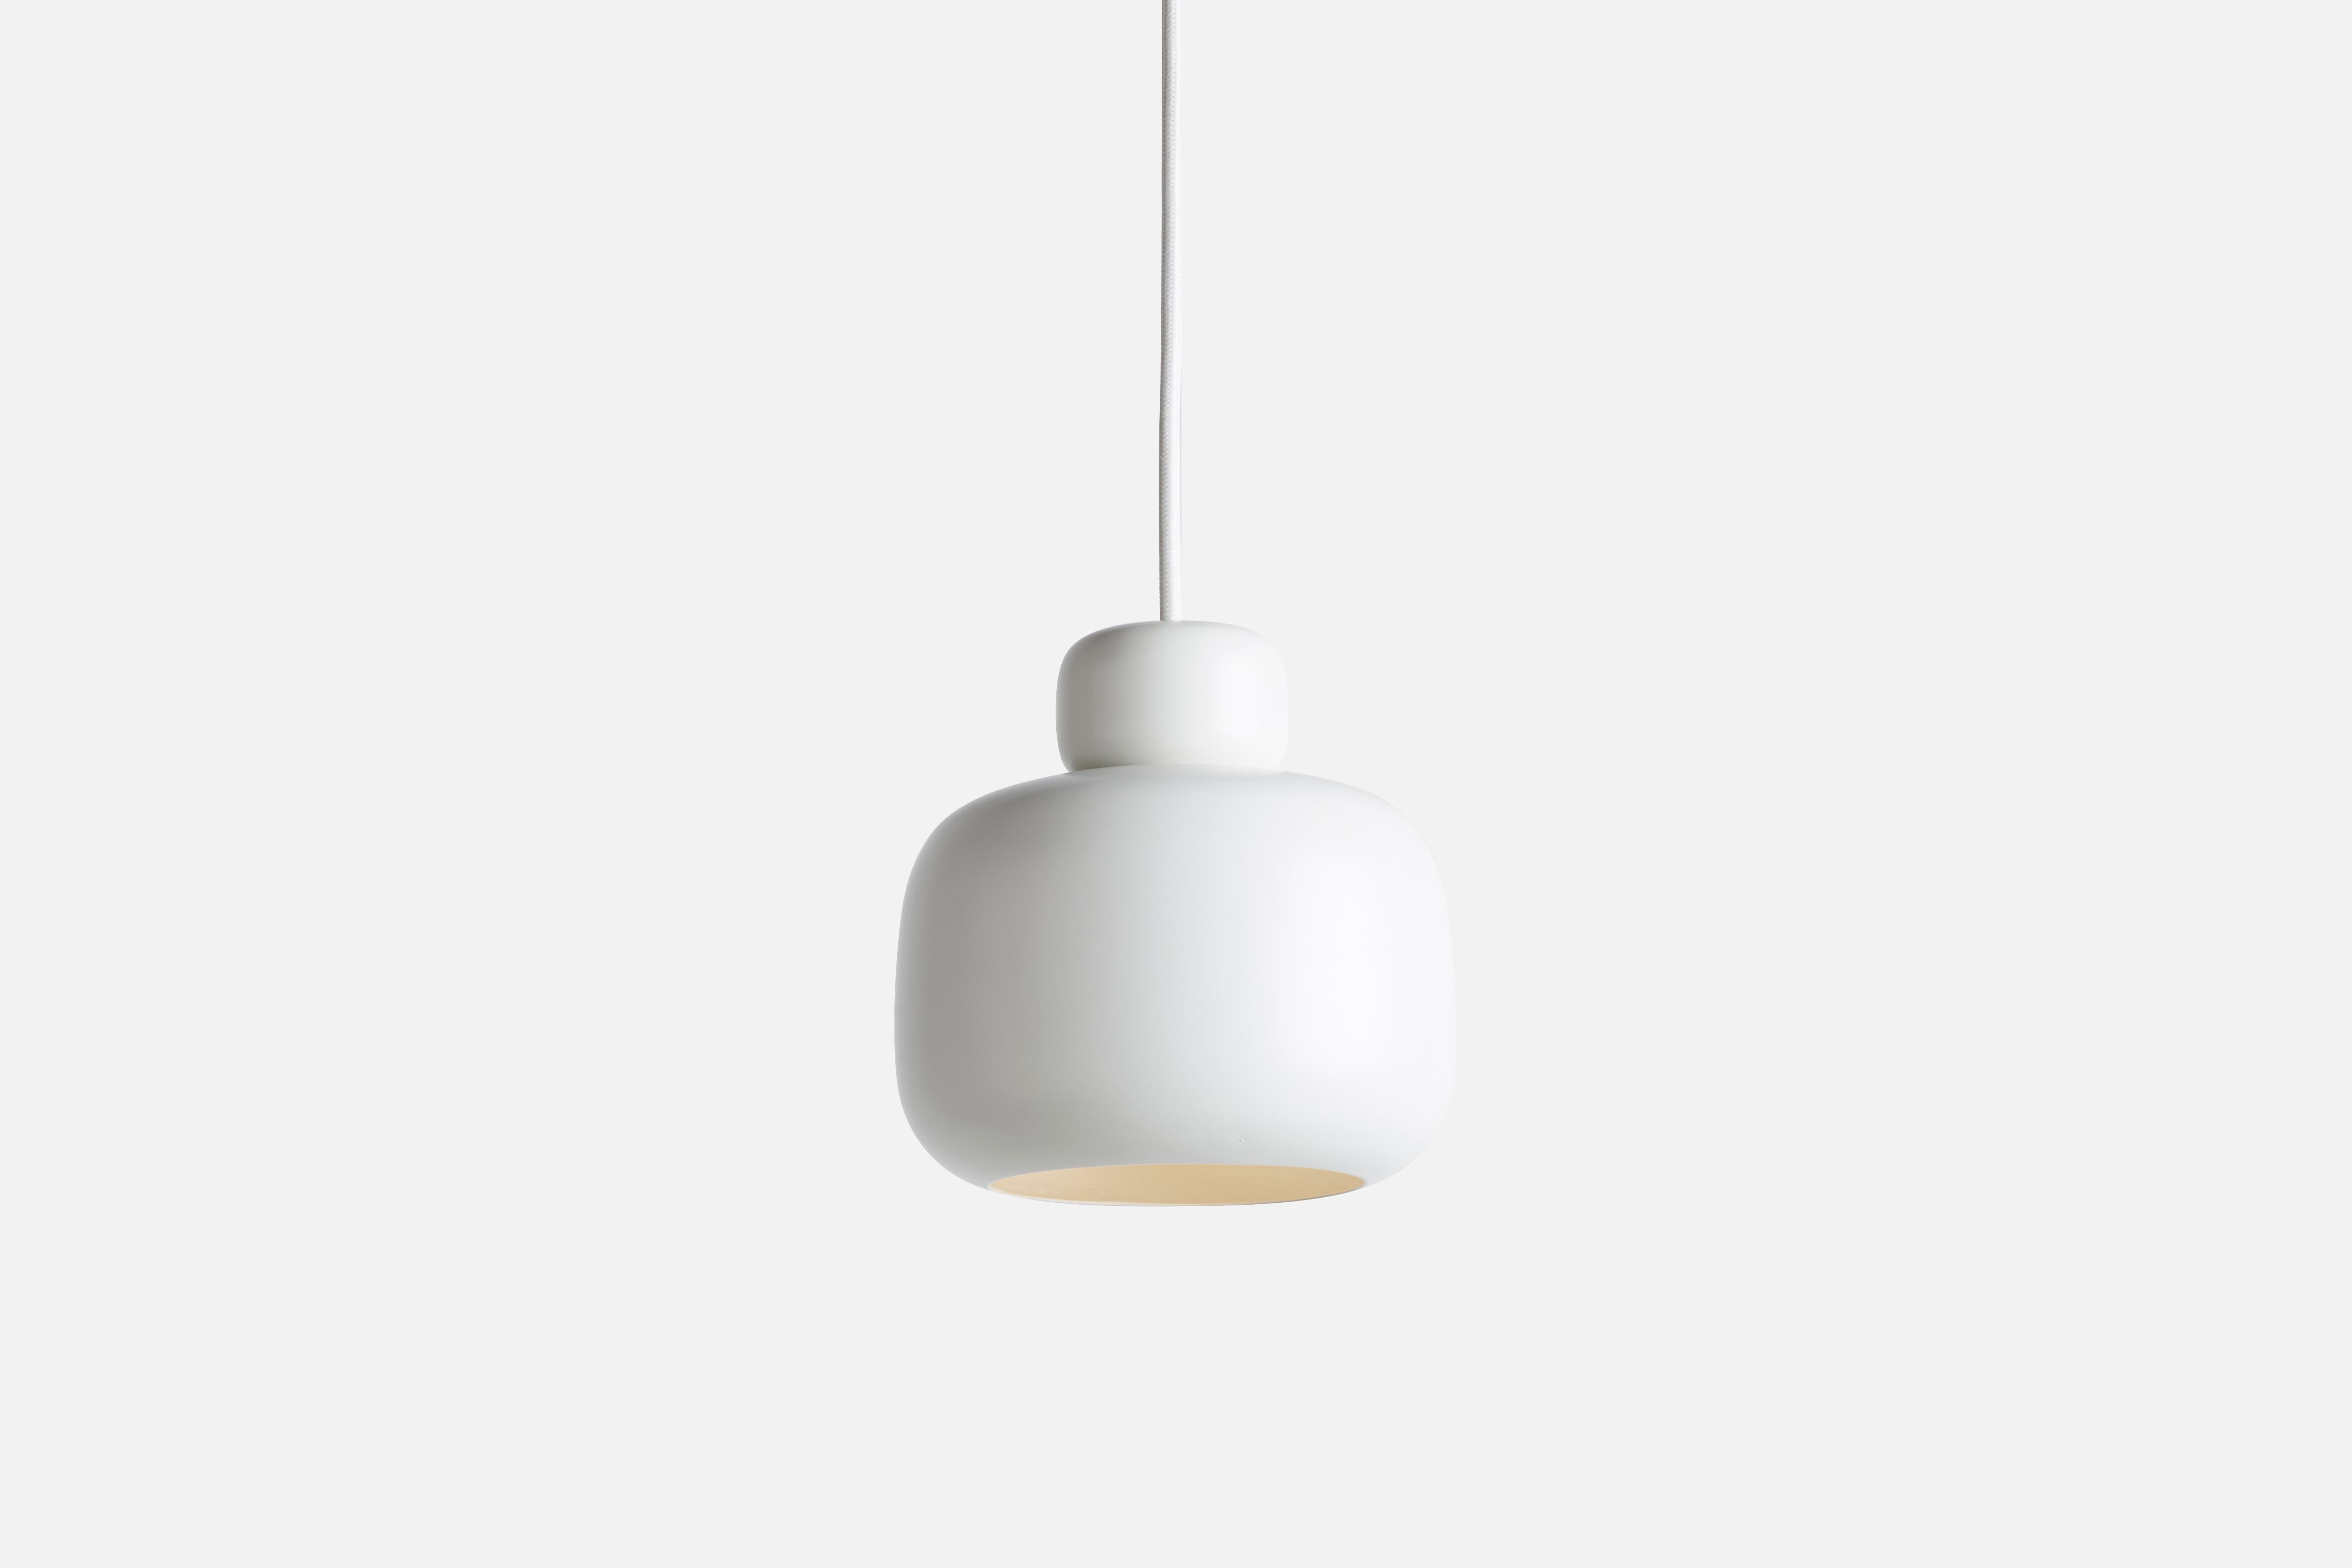 White Stone pendant lamp by Philip Bro
Materials: Metal.
Dimensions: D 15.9 x H 16 cm
Available in yellow, white and black.

Philip Bro is an experienced Danish designer with a drive to prove that serious design can still be stylish, playful